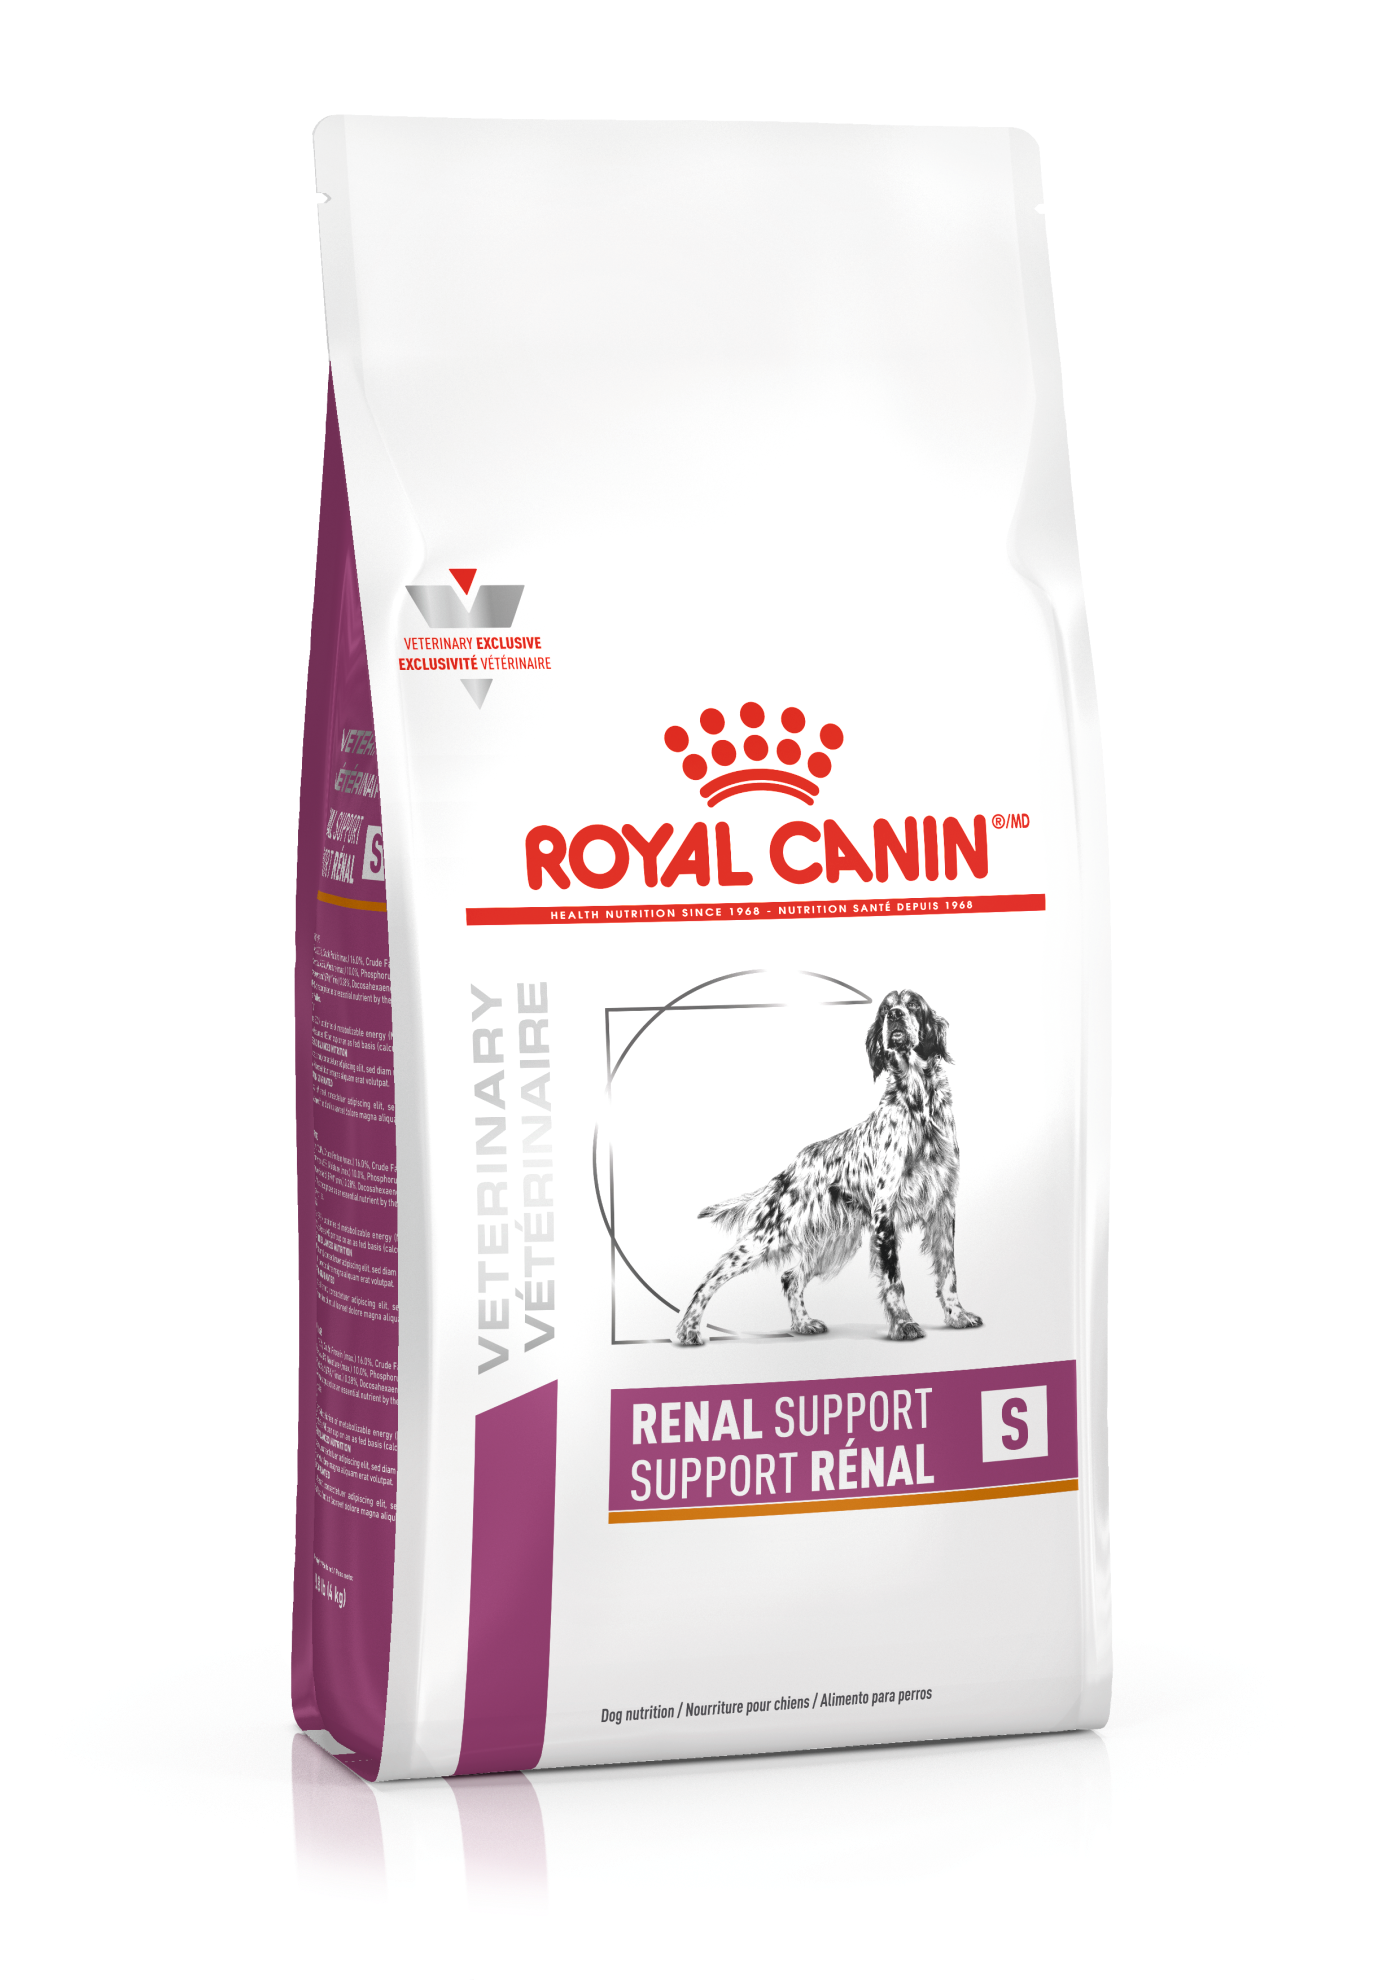 Renal Support S Canine